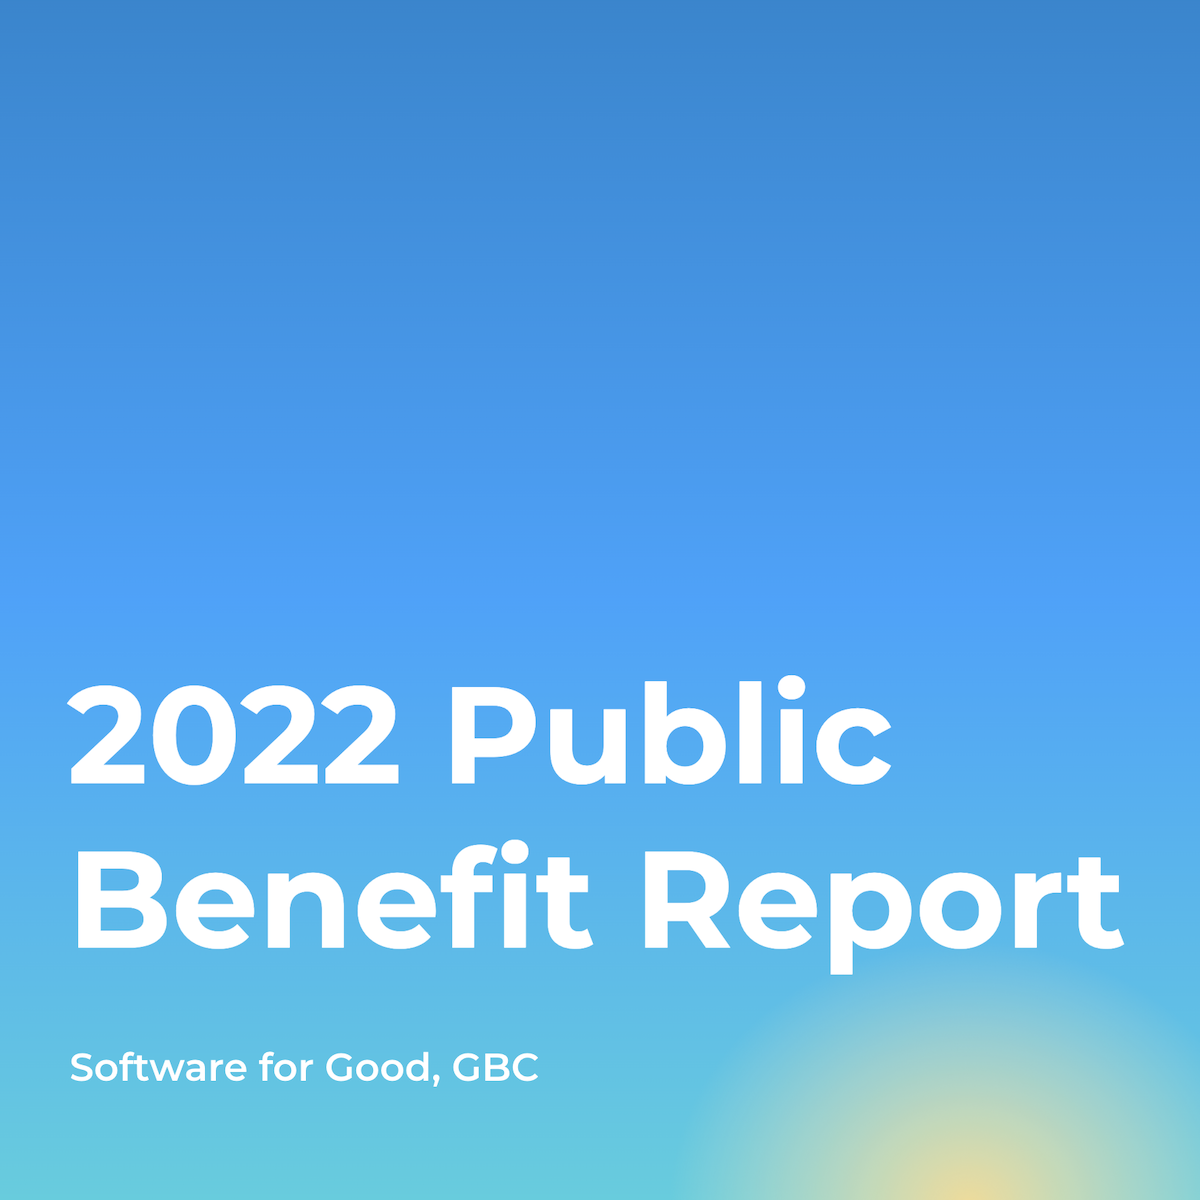 2022 Public Benefit Report for Software for Good